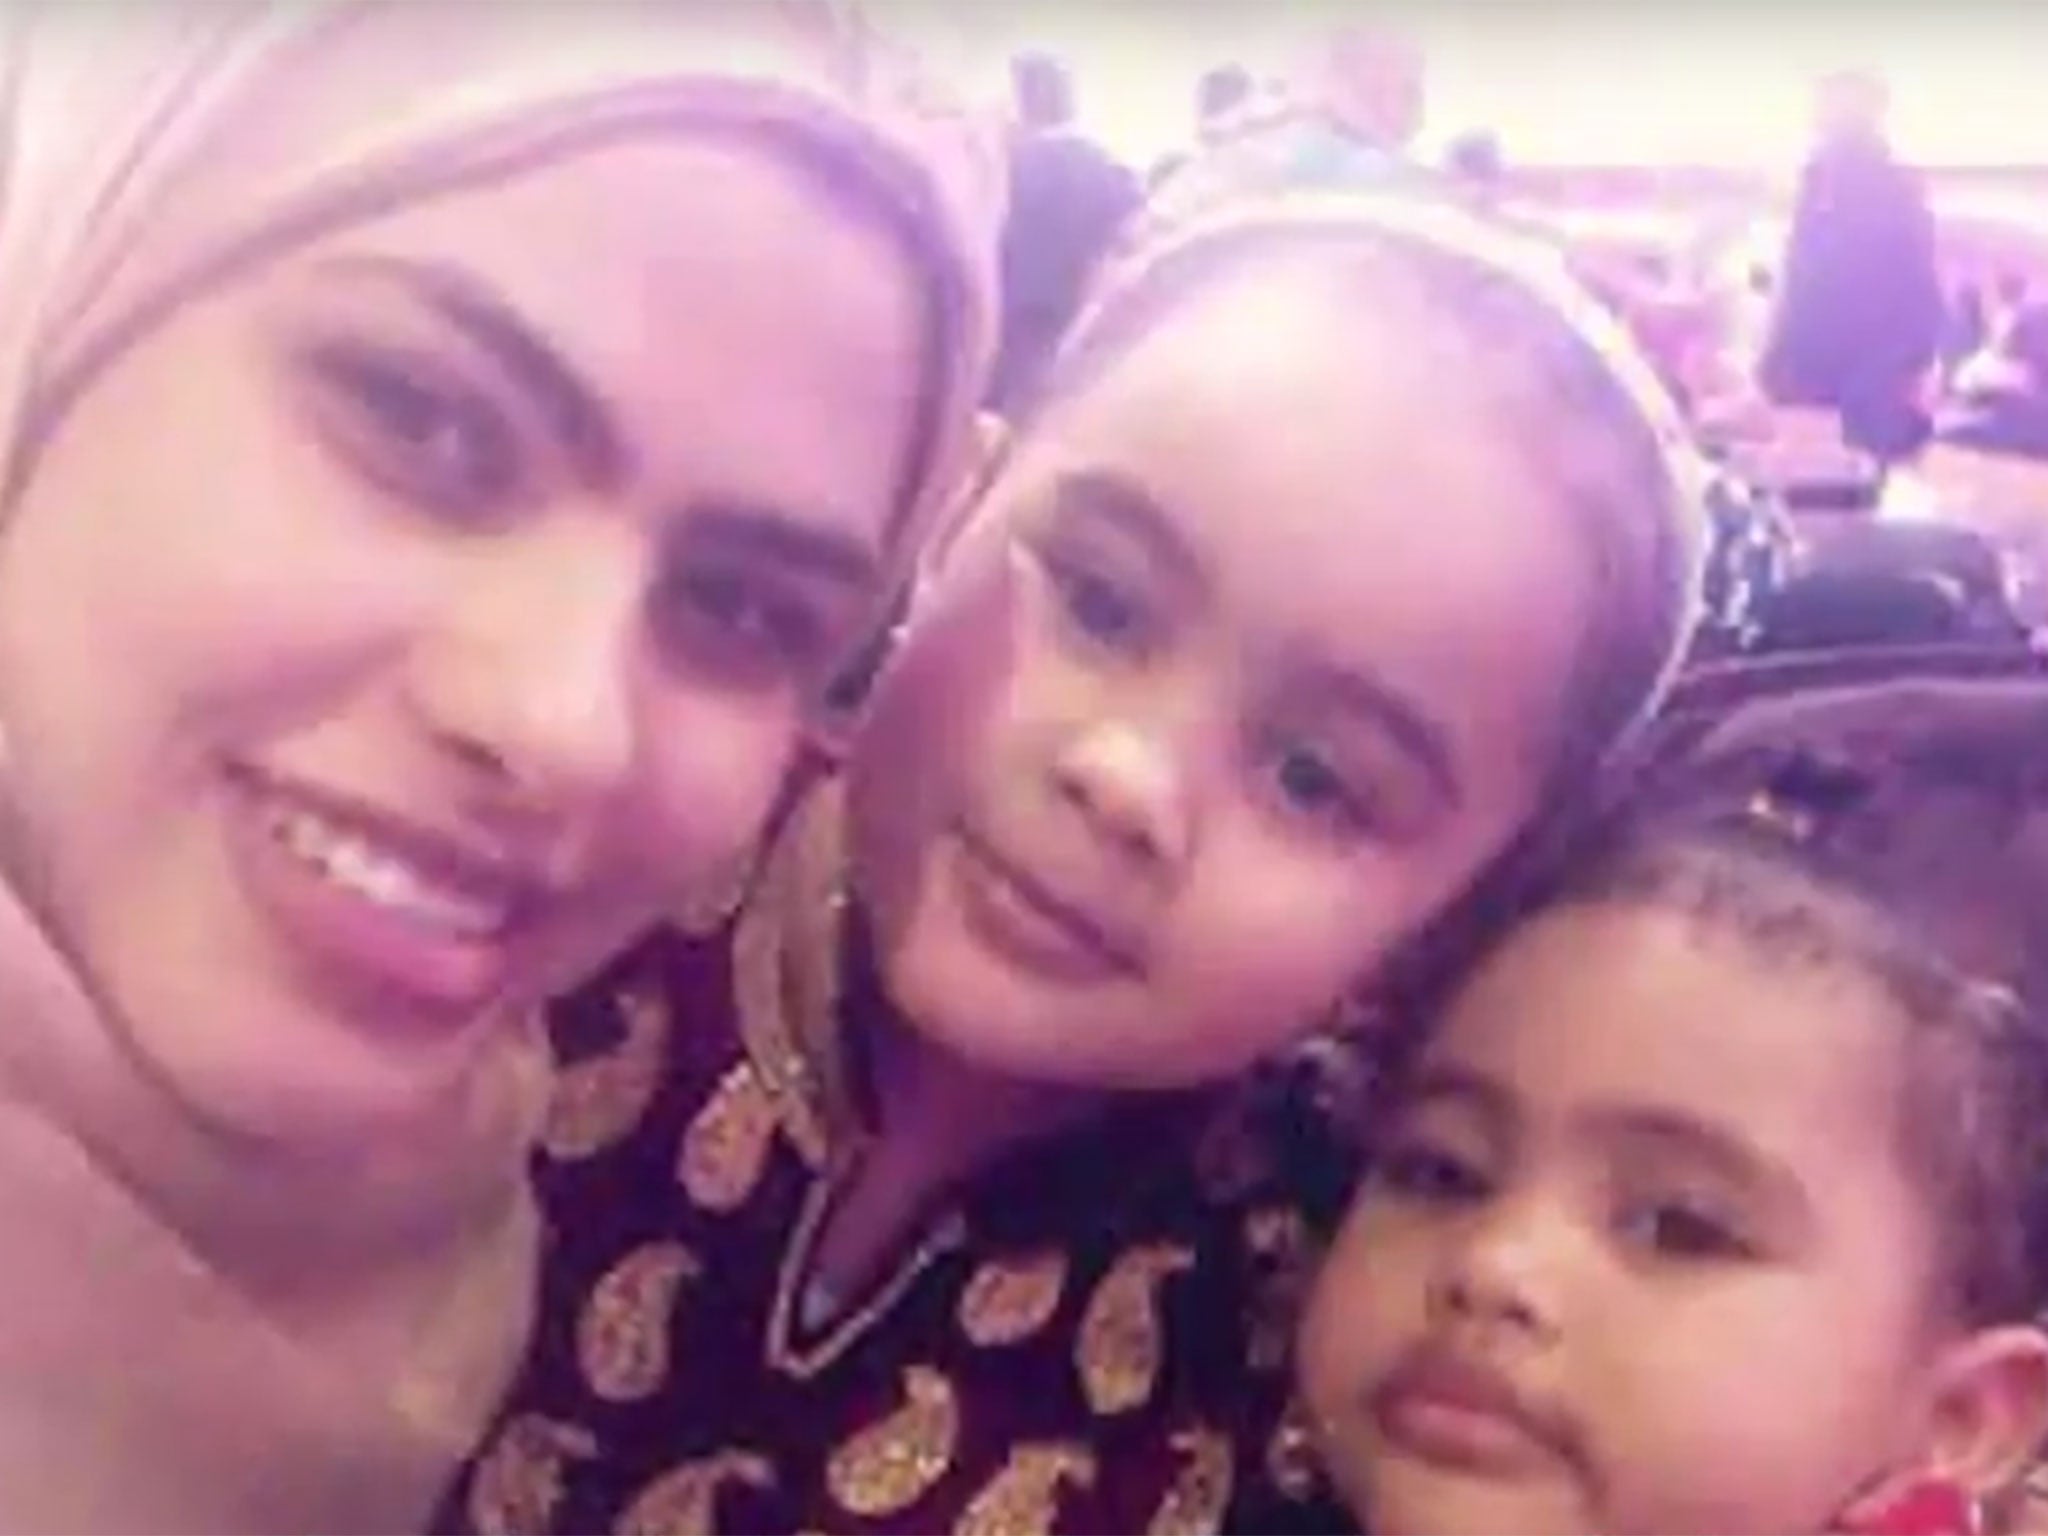 Rania Ibrahim and her daughters, Fathia and Hania, who lived on the 23rd floor of Grenfell Tower